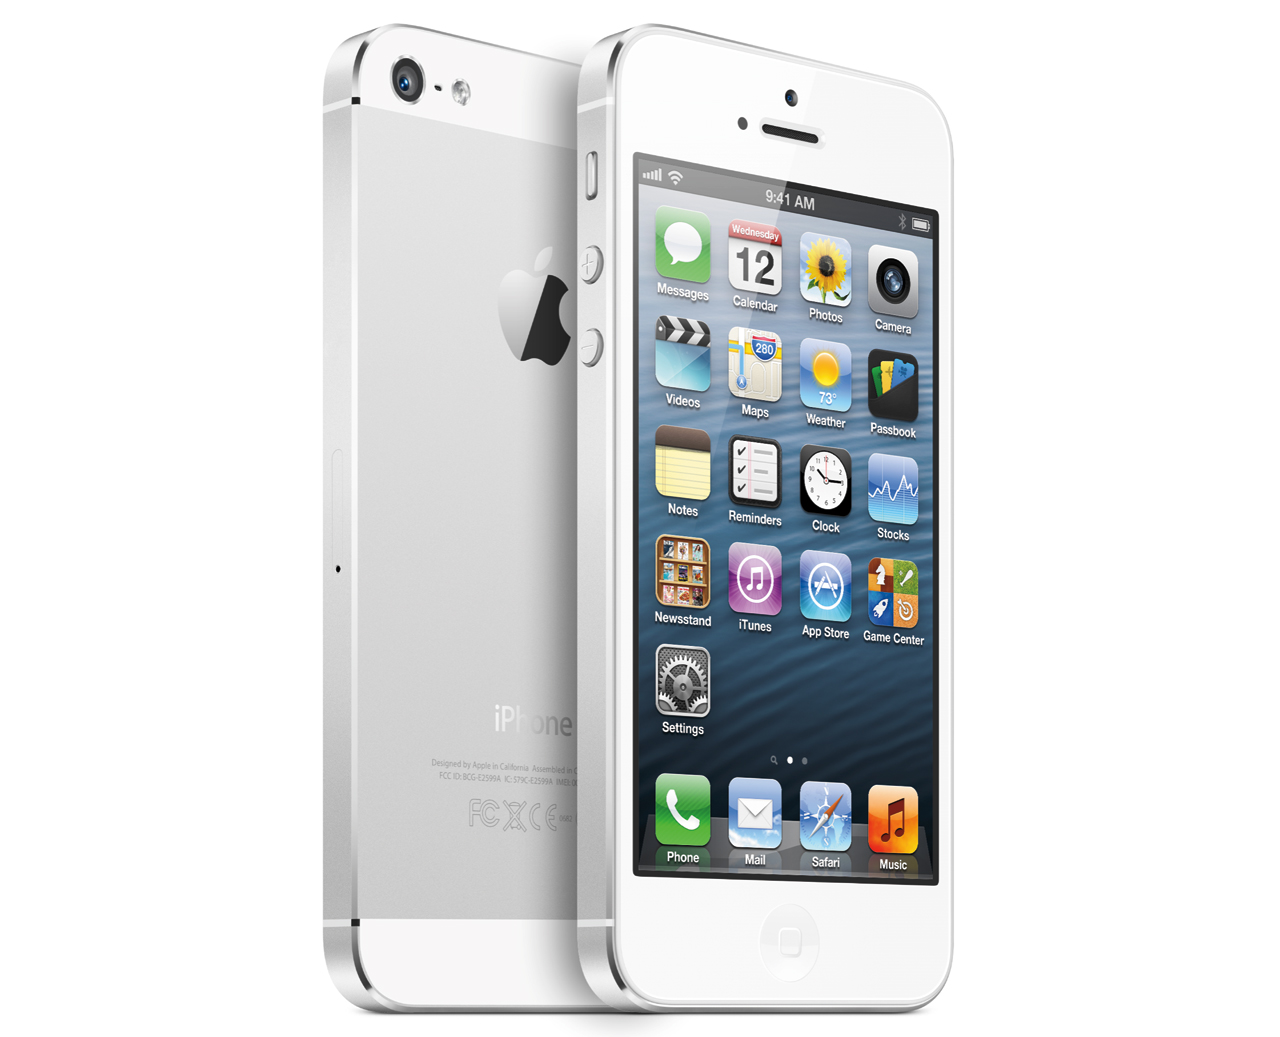 Leaked Images Of Apple iPhone 5S and iPhone-6